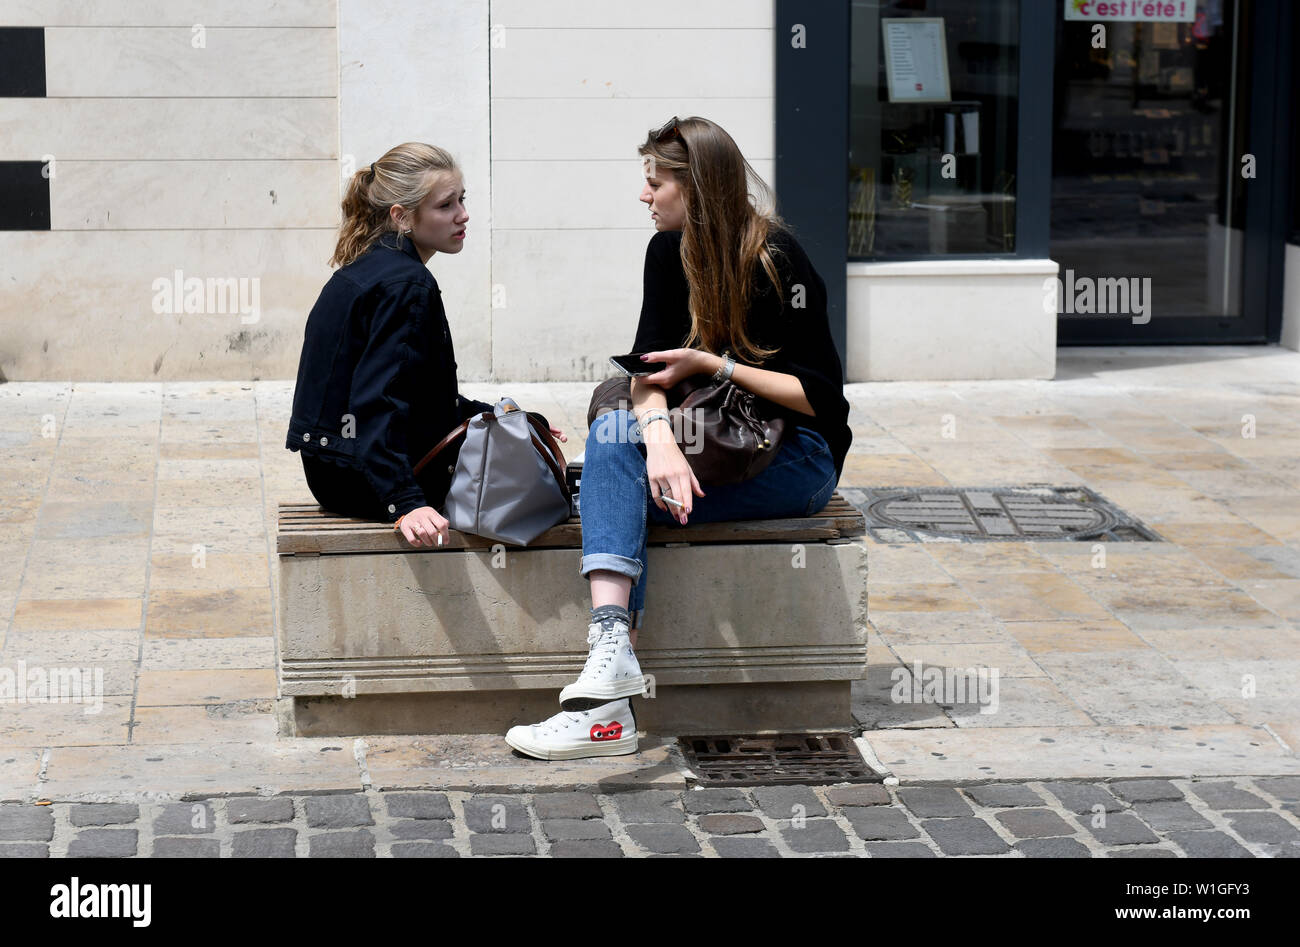 Two young women smoking cigarettes in Troyes, France, Europe Stock Photo